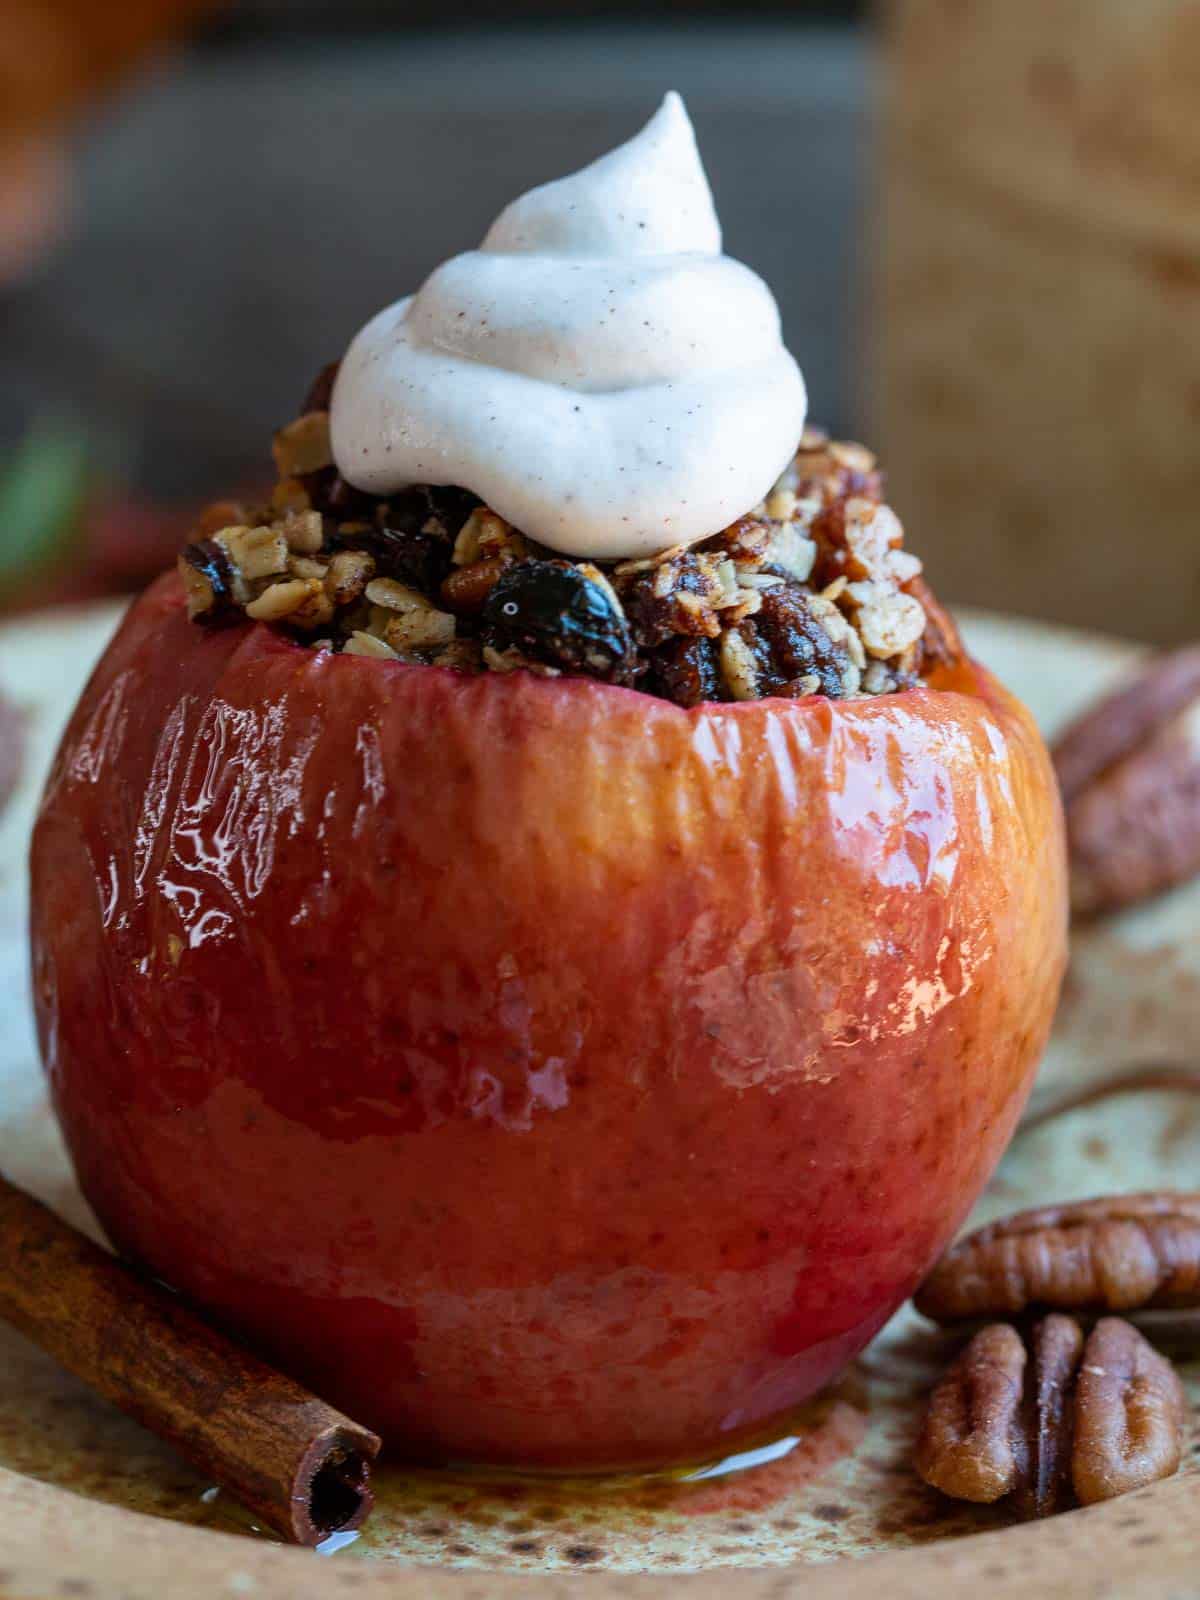 Air fried stuffed baked apple garnished with pecans and a dollop of whipped coconut topping.